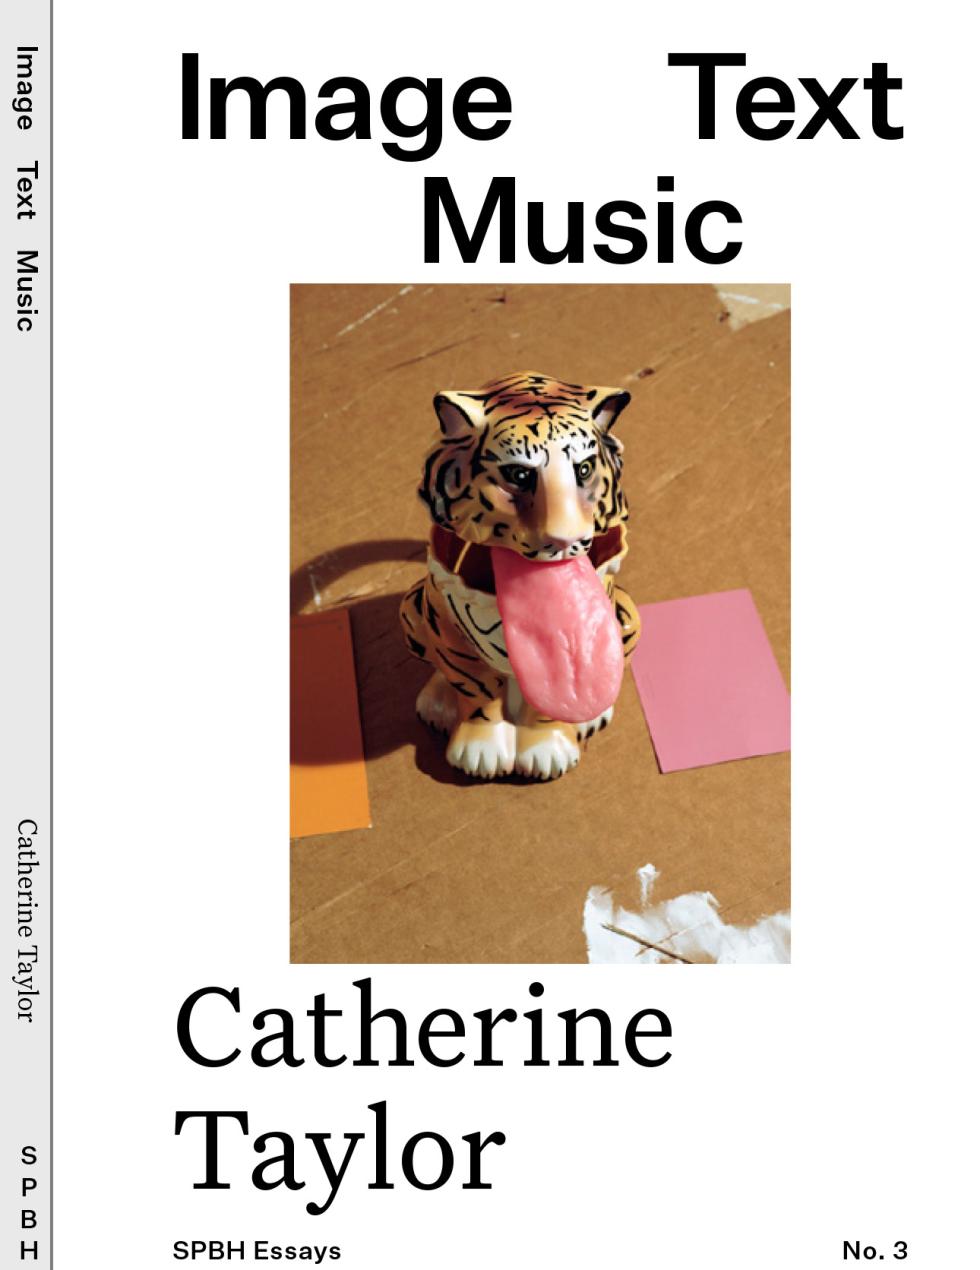 Book cover of Image Text Music by Catherine Taylor with smaller image of a tiger figurine with a large pink tongue sticking out.